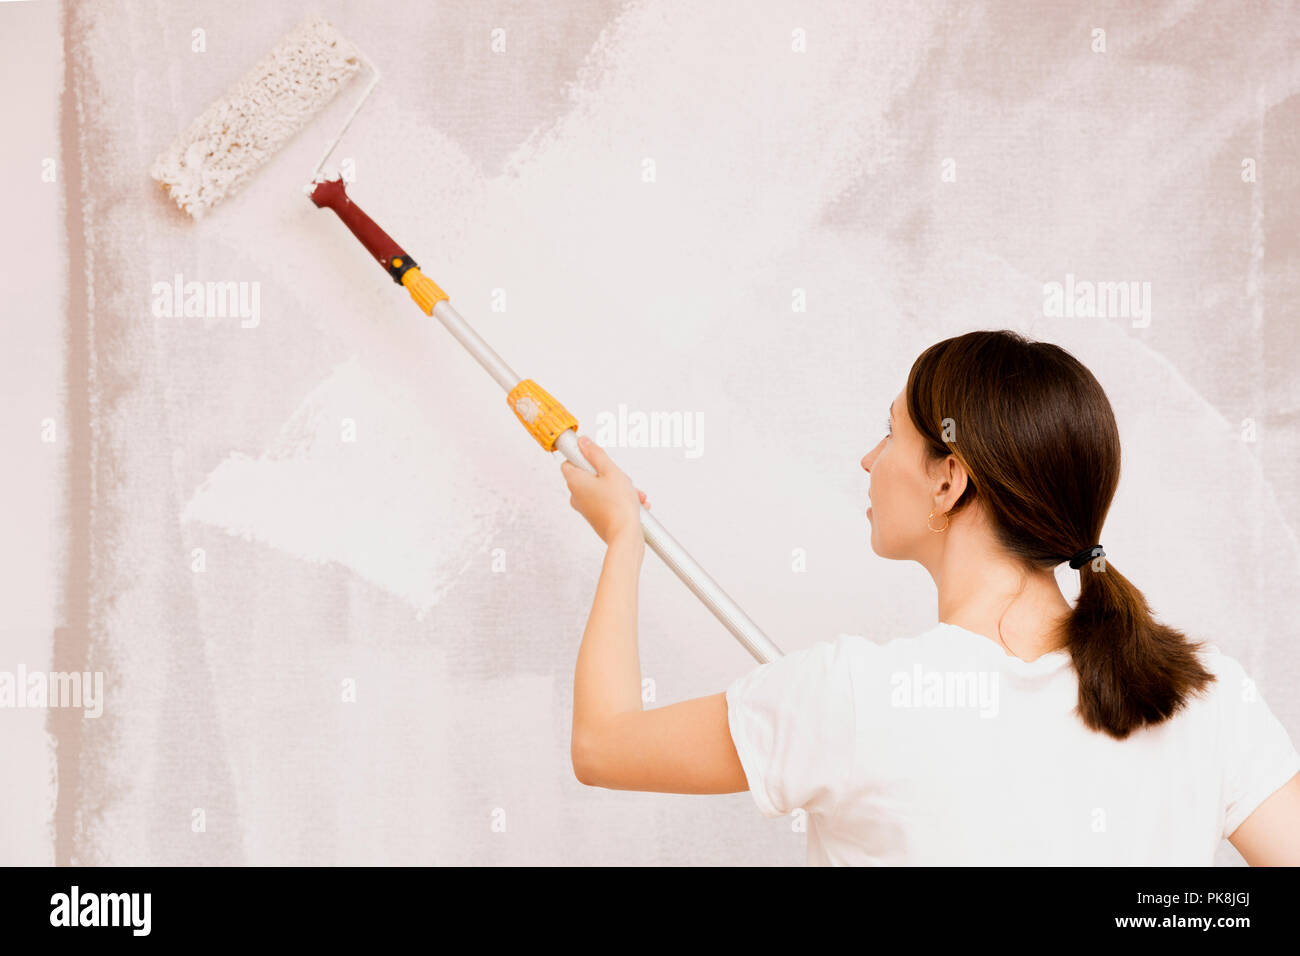 Home improvement. Beautiful woman painting wall with paint roller. Stock Photo